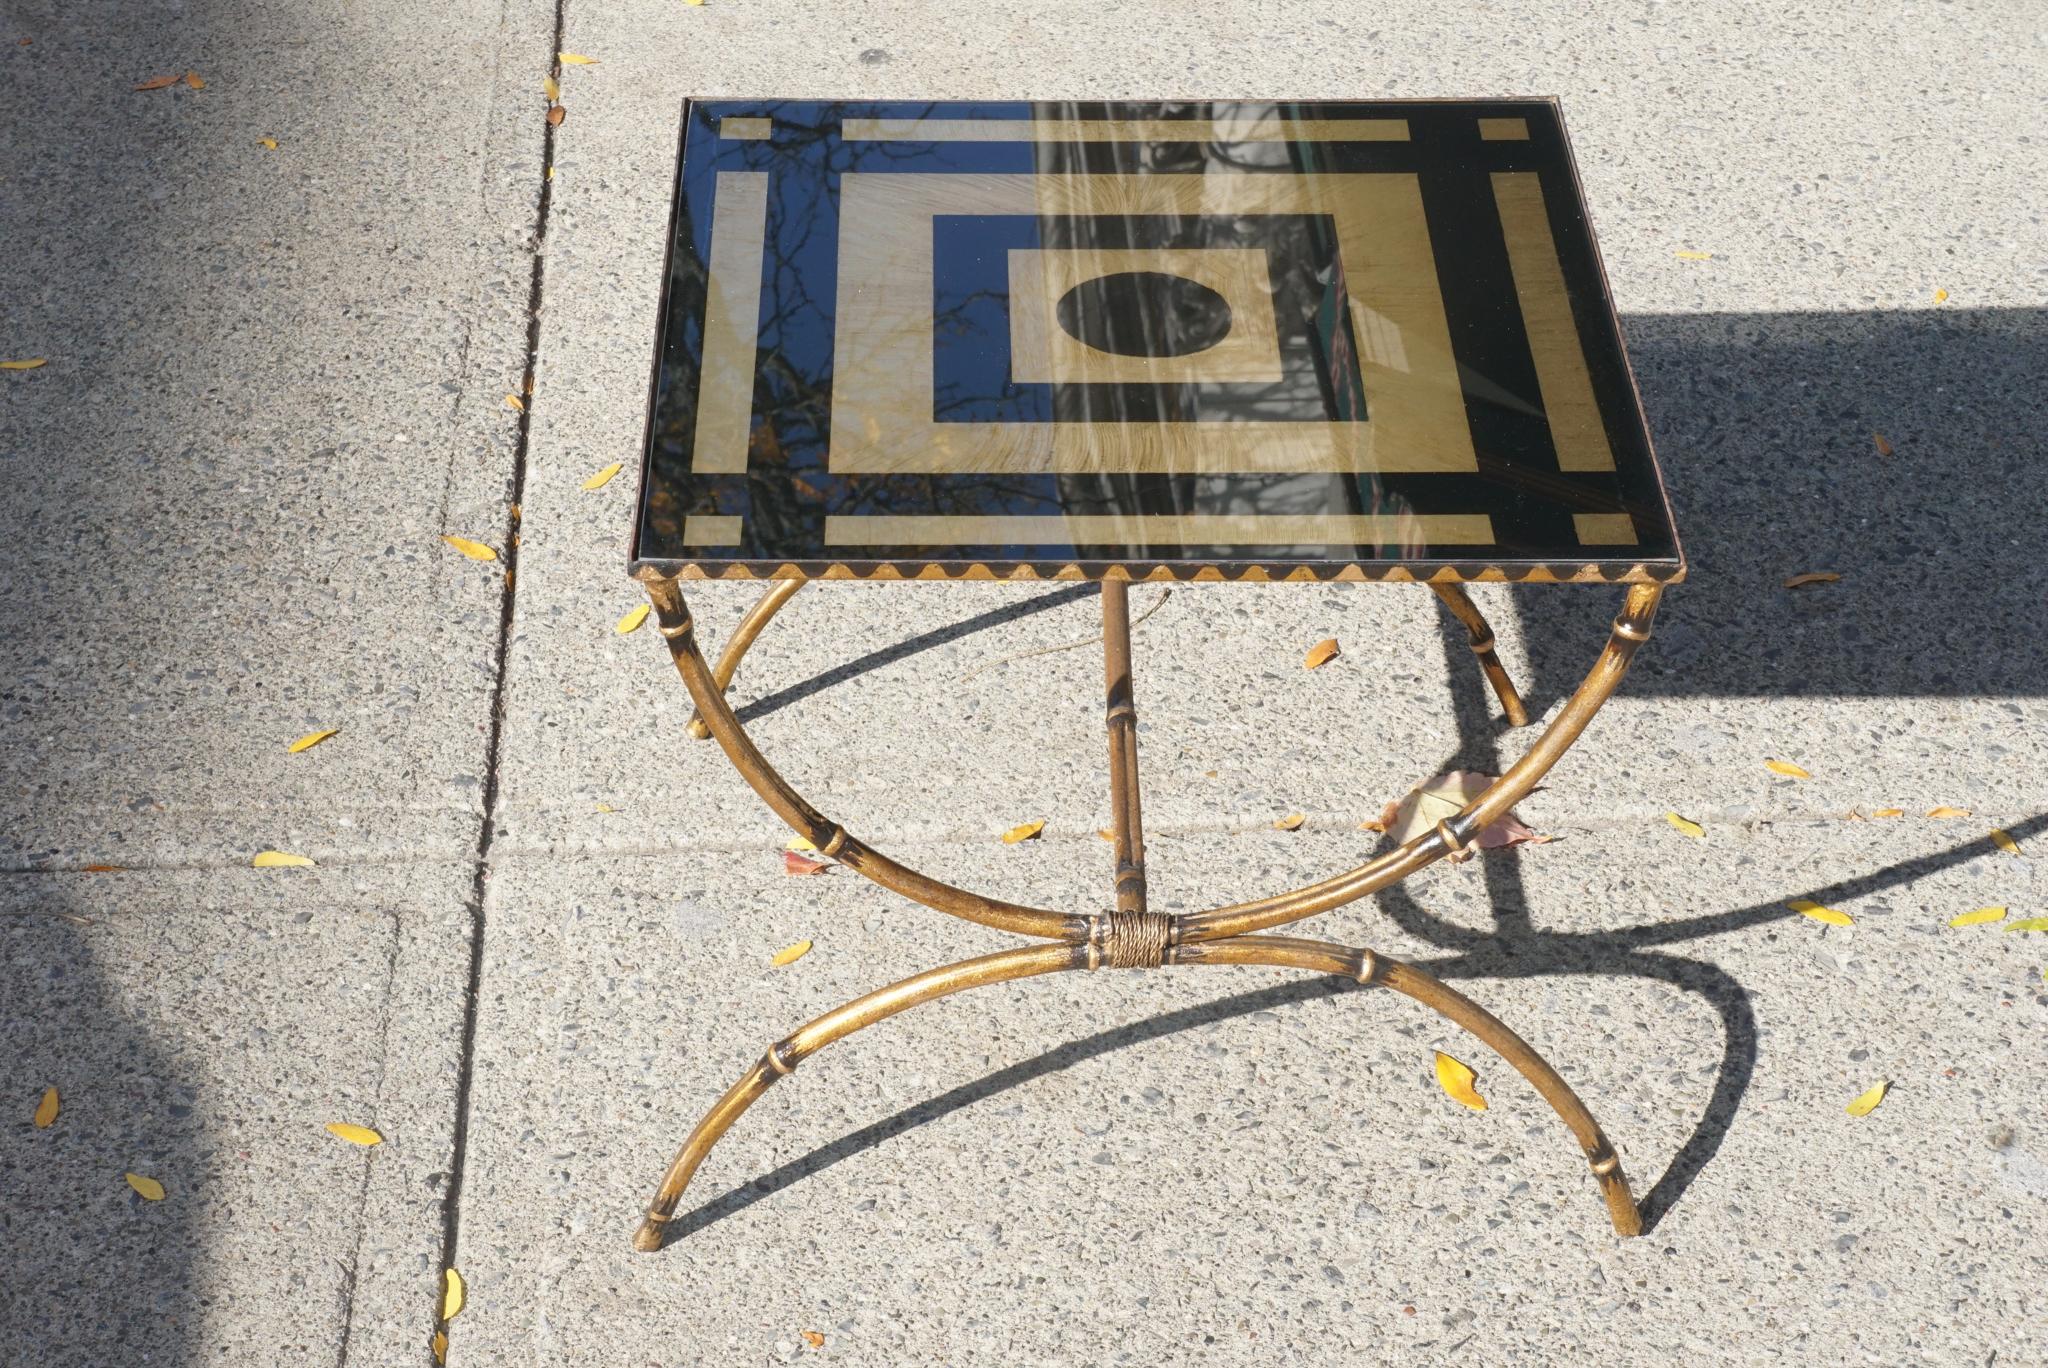 Made in America circa 1955 this low wrought iron table is made to resemble bamboo and is then gilded and painted with a wavy decorative border along the apron. Set within the frame of the apron is a reverse glass painted and gilded top. The design